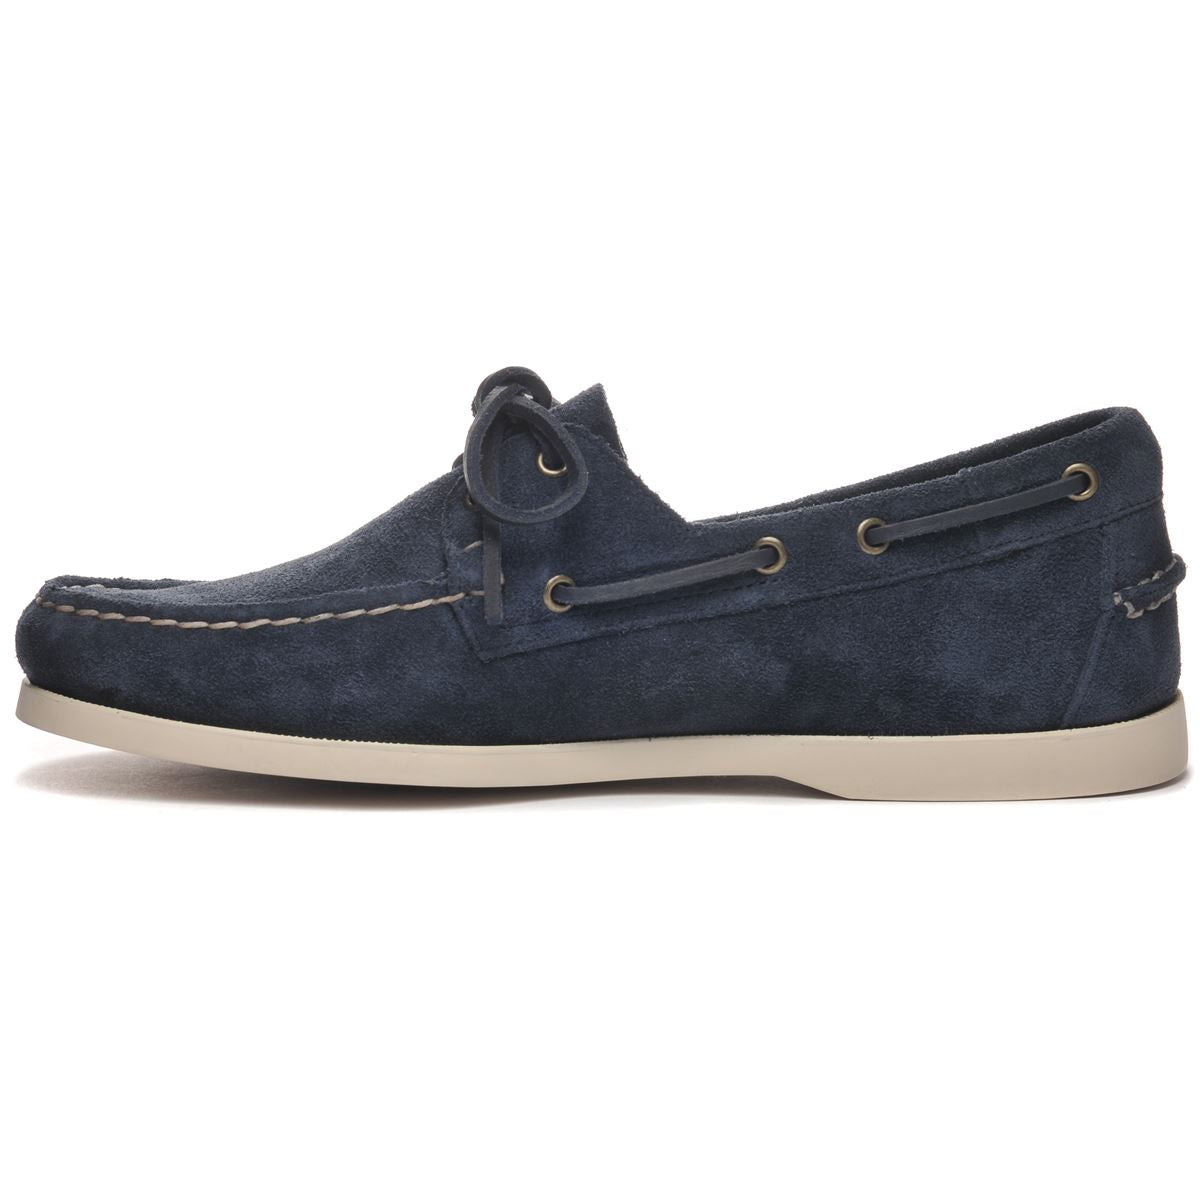 Portland Roughout - Navy Blue